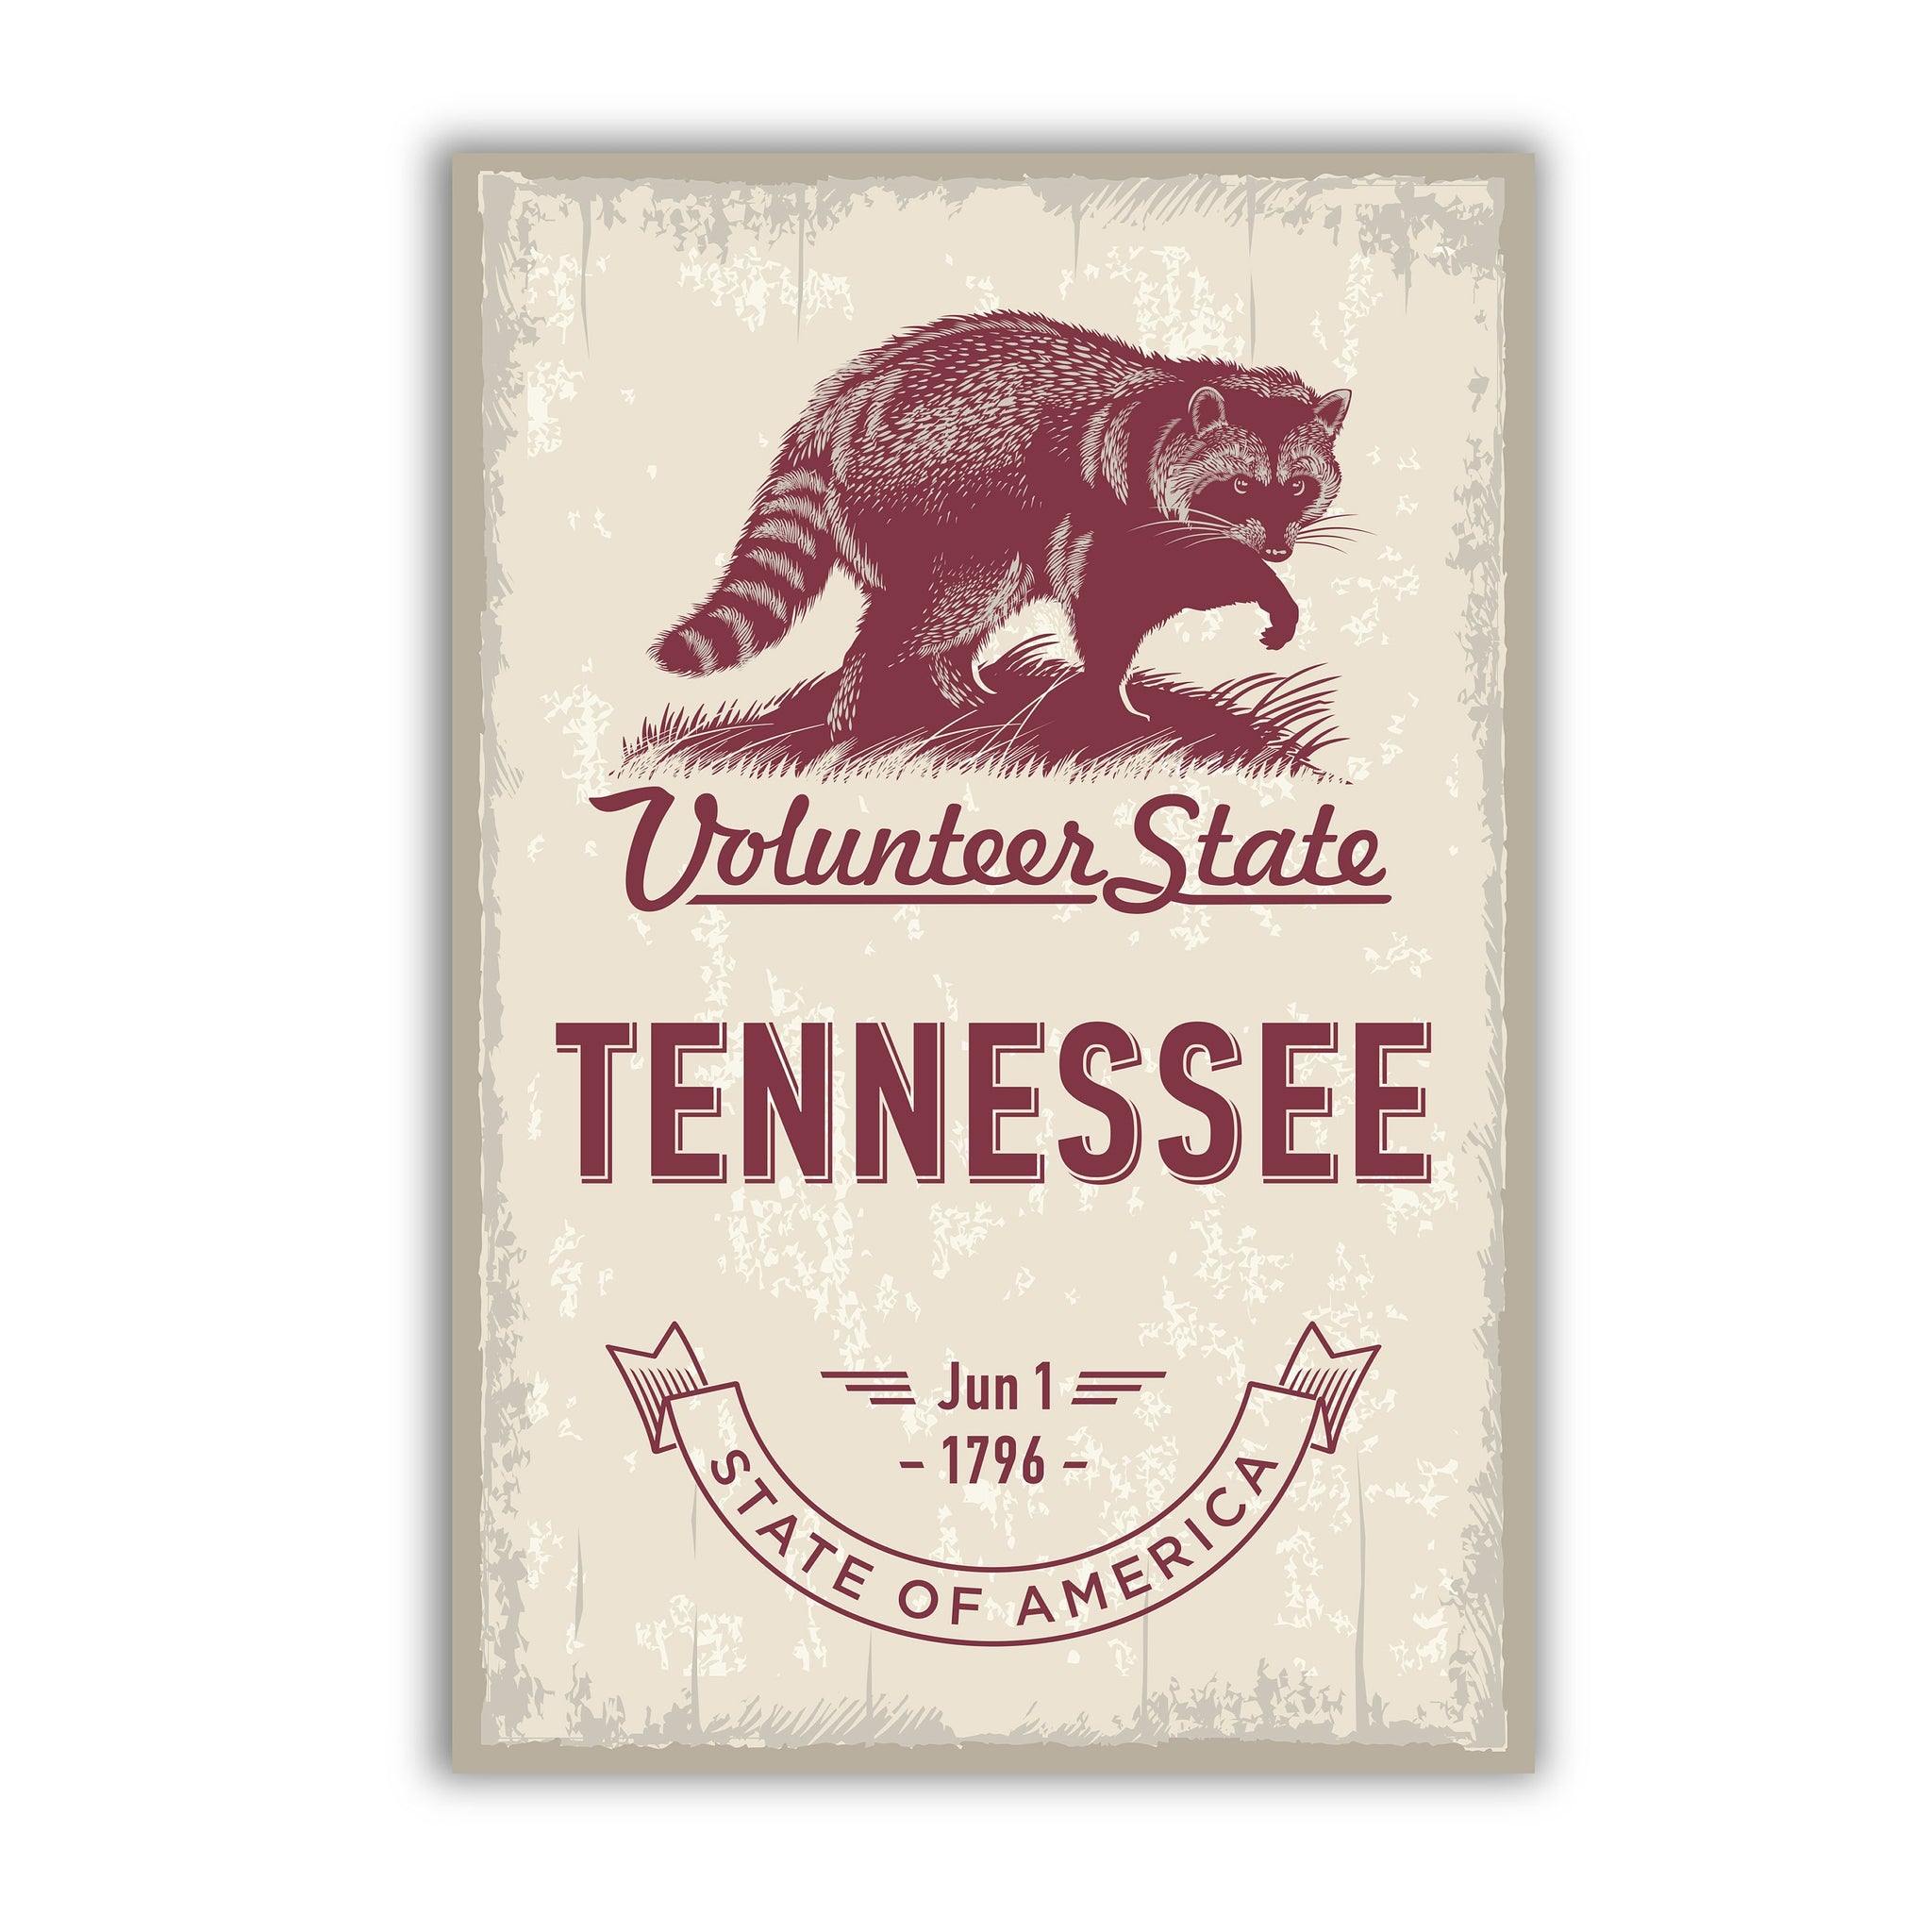 Tennessee State Symbol Poster, South Tennessee Poster Print, State Emblem Poster, Retro Travel State Poster, Home and Office Wall Art